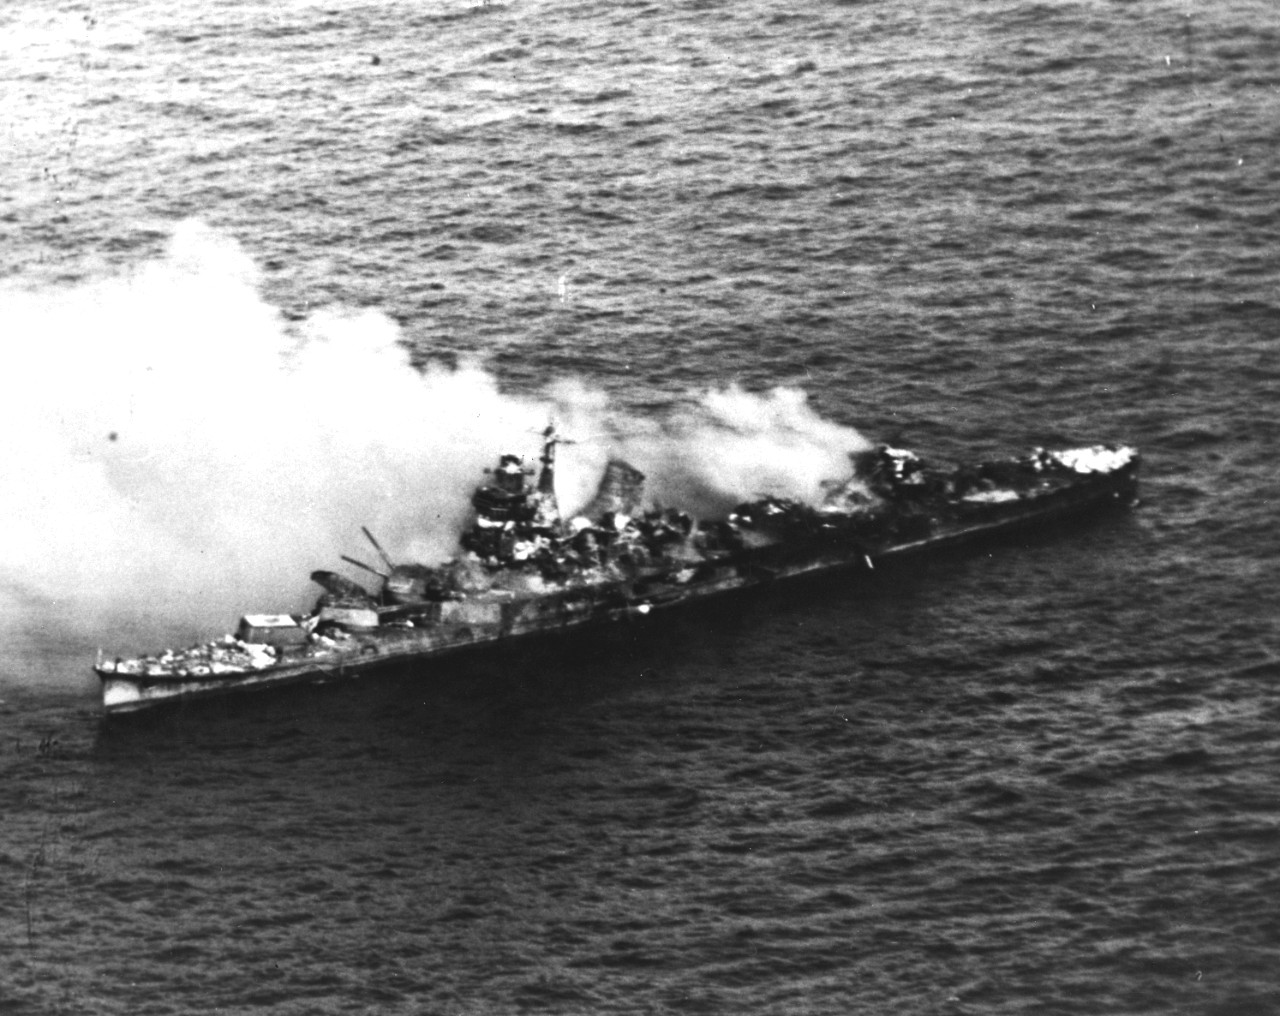 Mikuma burning after being bombed by Enterprise's aircraft, 6 Jun 1942